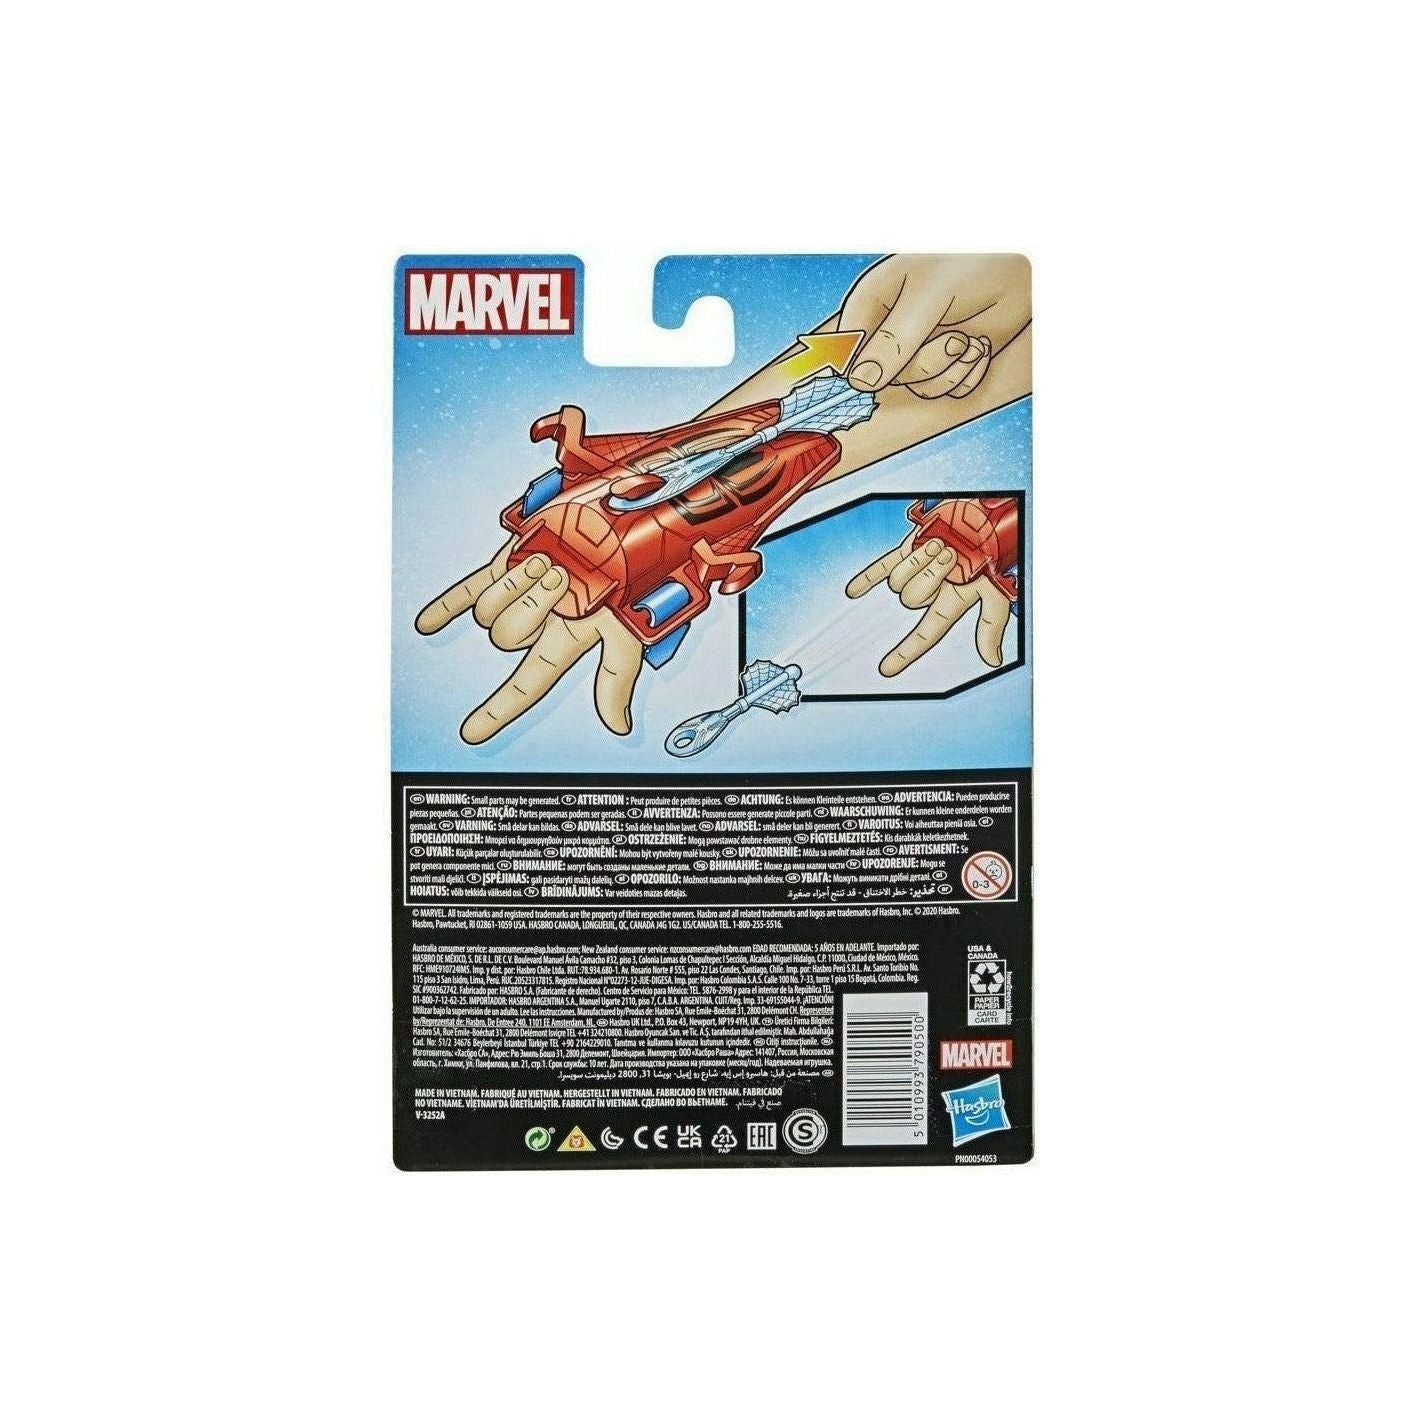 Hasbro MARVEL SPIDER-MAN THROWS COBWEBS - BumbleToys - 6+ Years, Accessories, Action Figures, Black Panther, Boys, Eagle Plus, Figures, Transformers